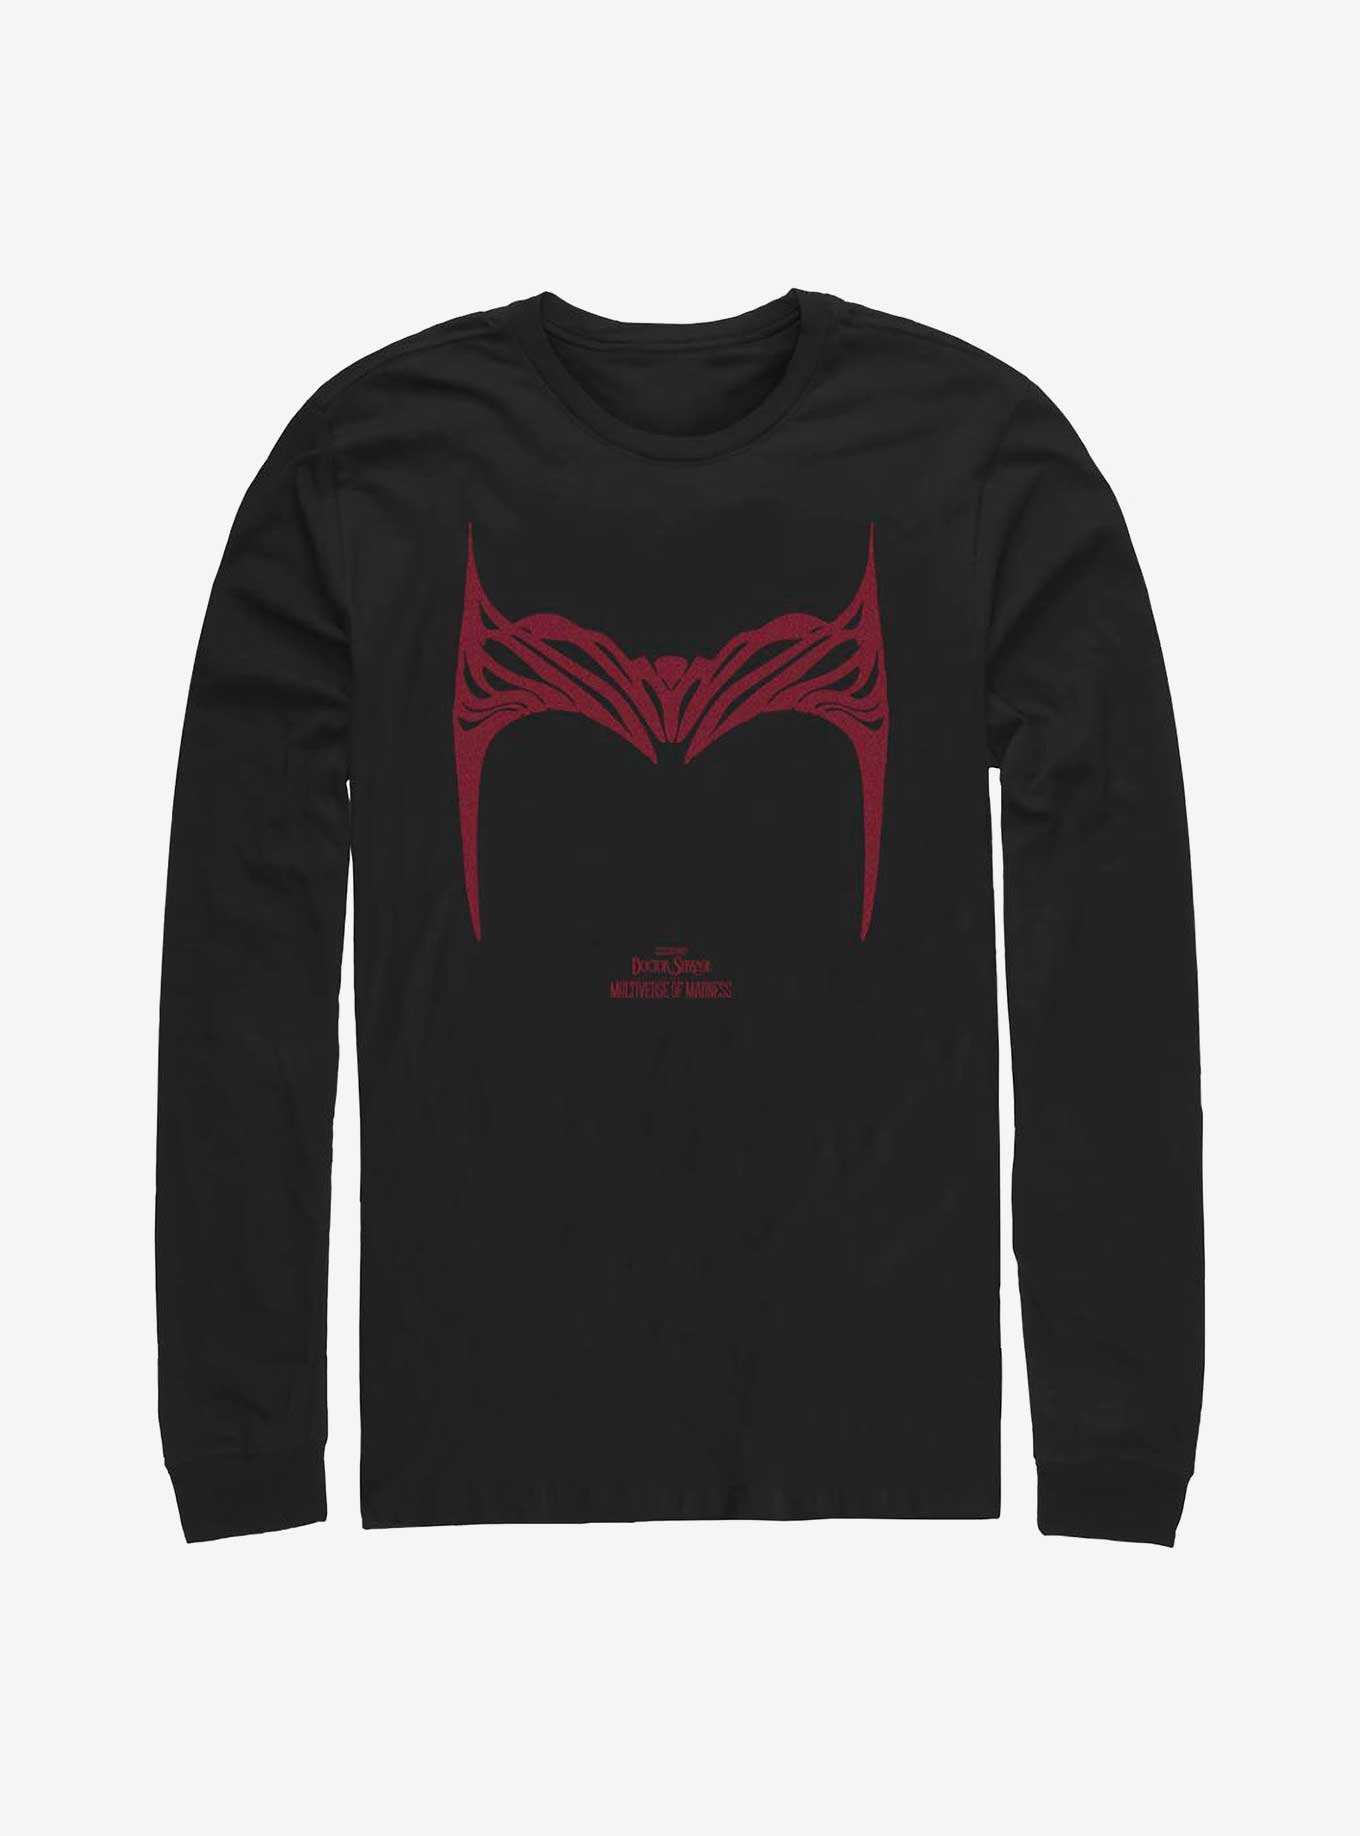 Marvel Doctor Strange In The Multiverse Of Madness Scarlet Witch Helm Long-Sleeve T-Shirt, , hi-res